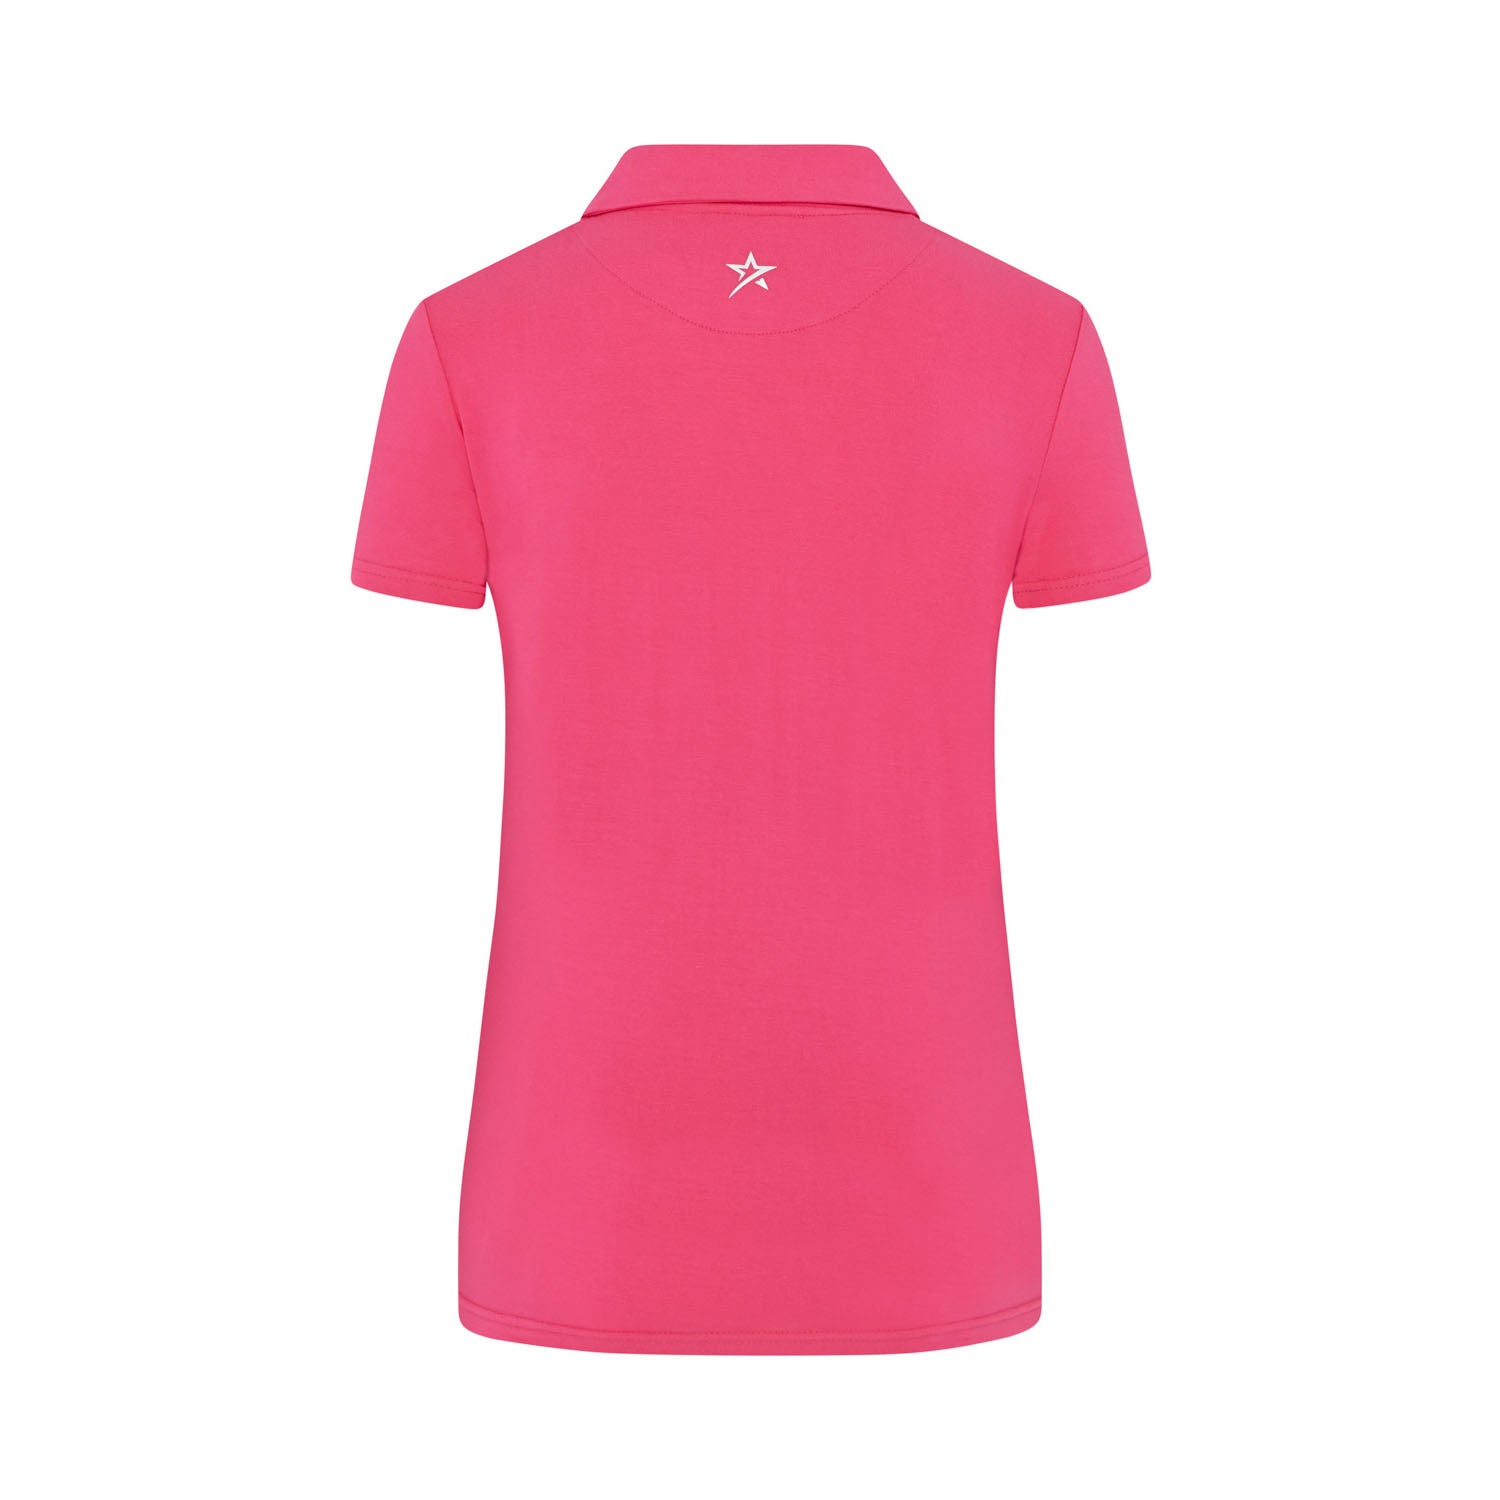 Swing Out Sister Ladies Ultra-Soft Stretch Short Sleeve Polo in Lush Pink